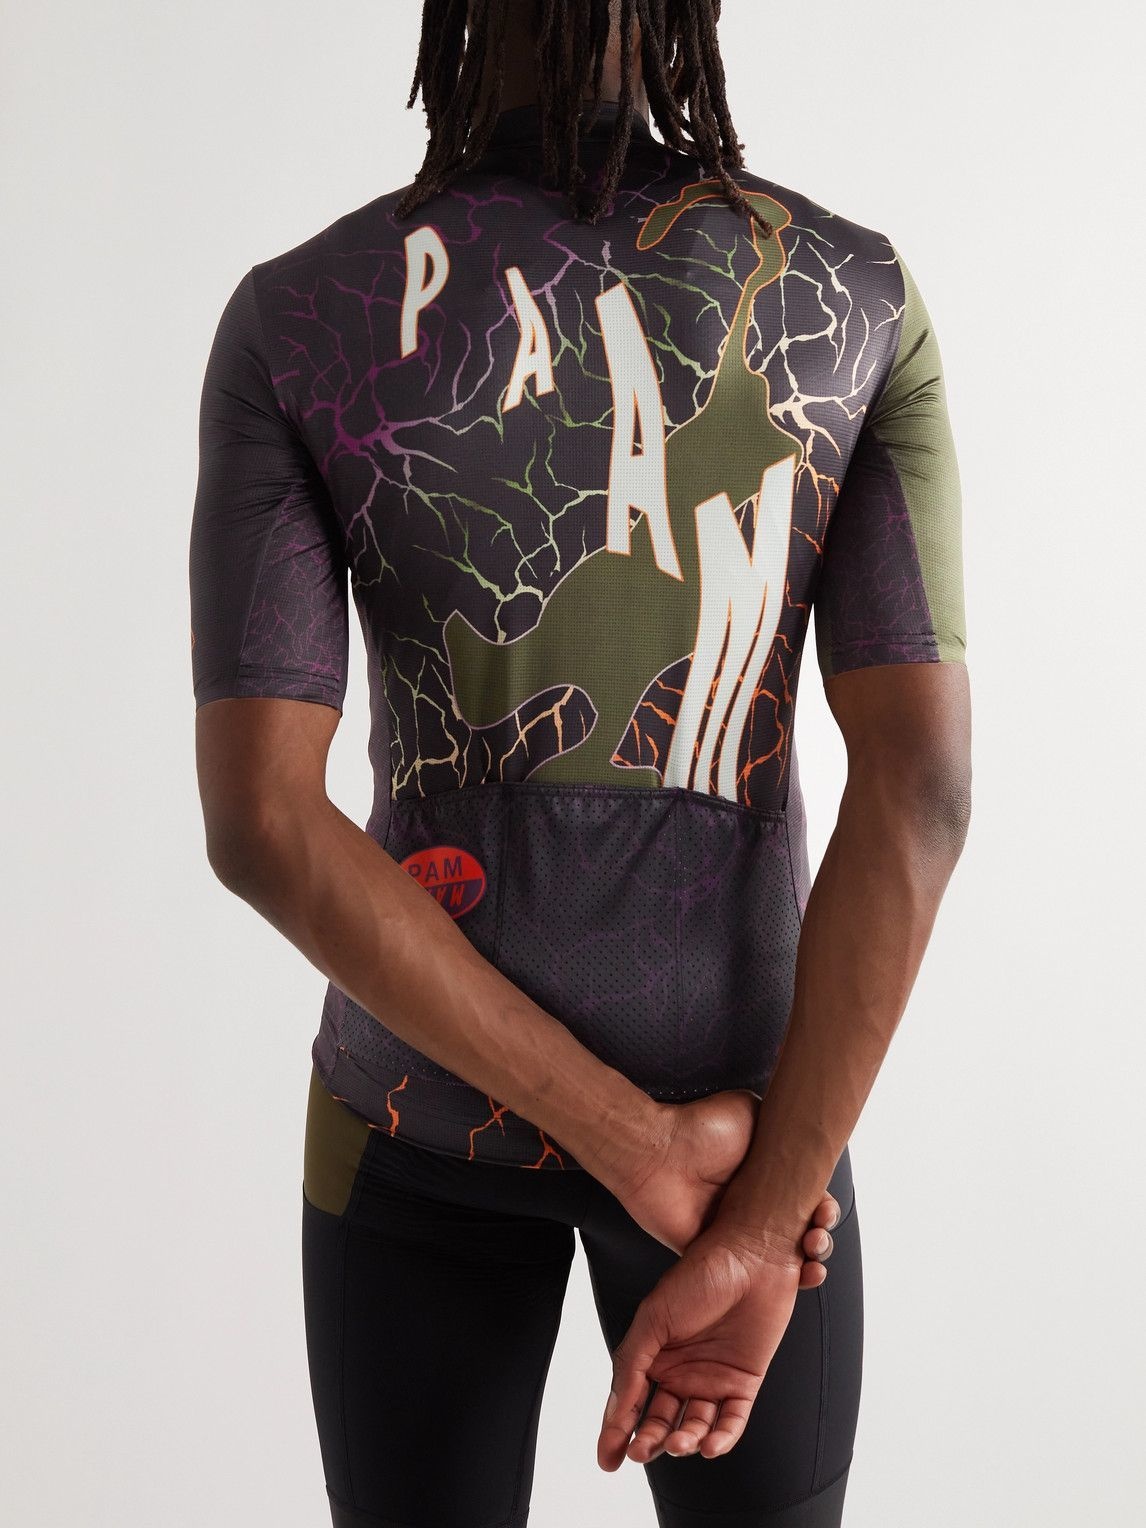 MAAP - P.A.M. Wild Team Printed Stretch Cycling Jersey - Green MAAP